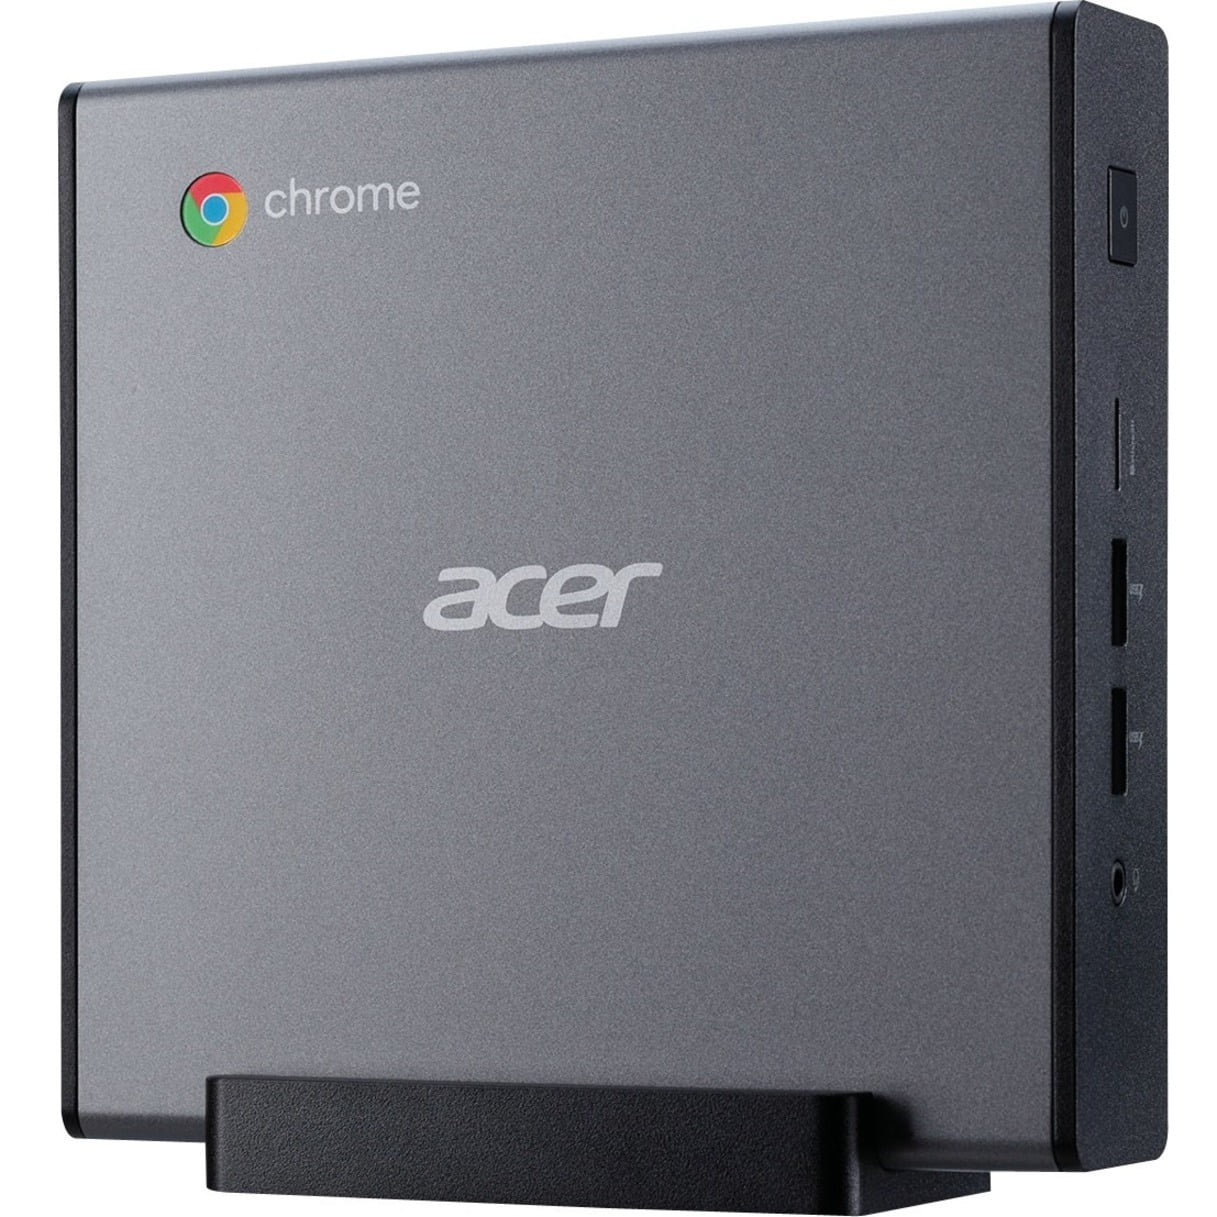 Picture of Acer DT.Z1RAA.001 i7 16GB 256GB CRM CXI4 Chromebox